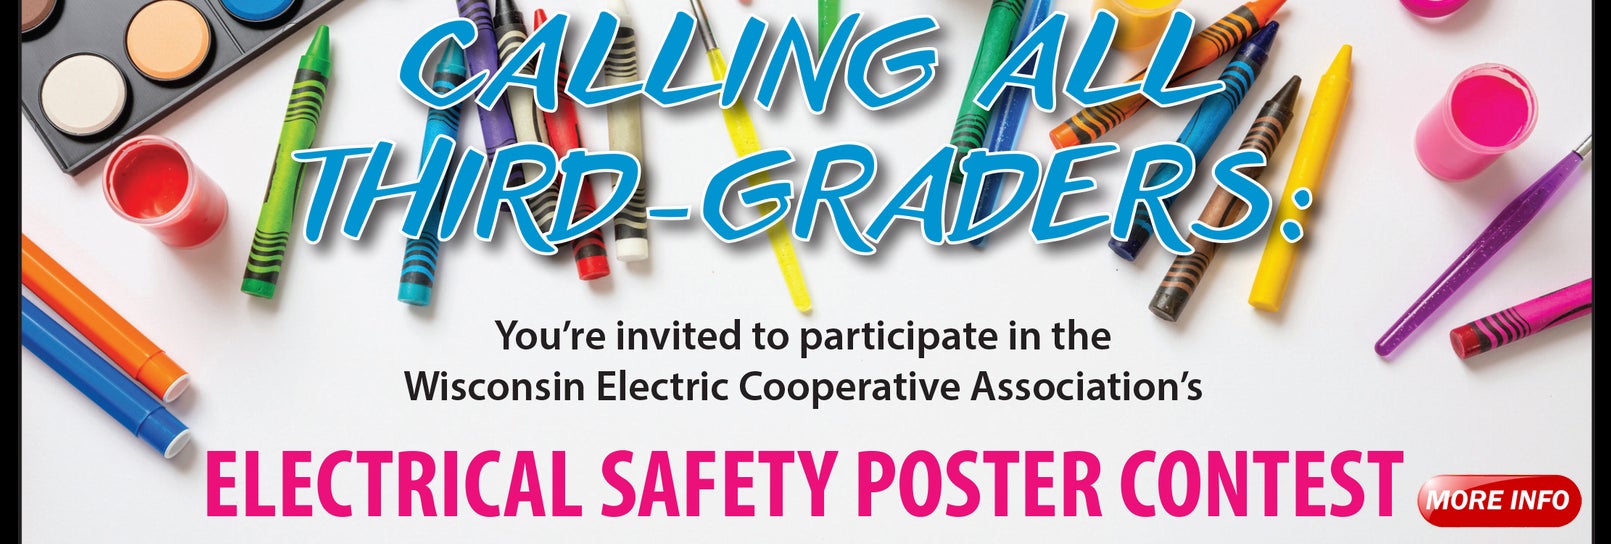 Electricity Safety Poster Contest information